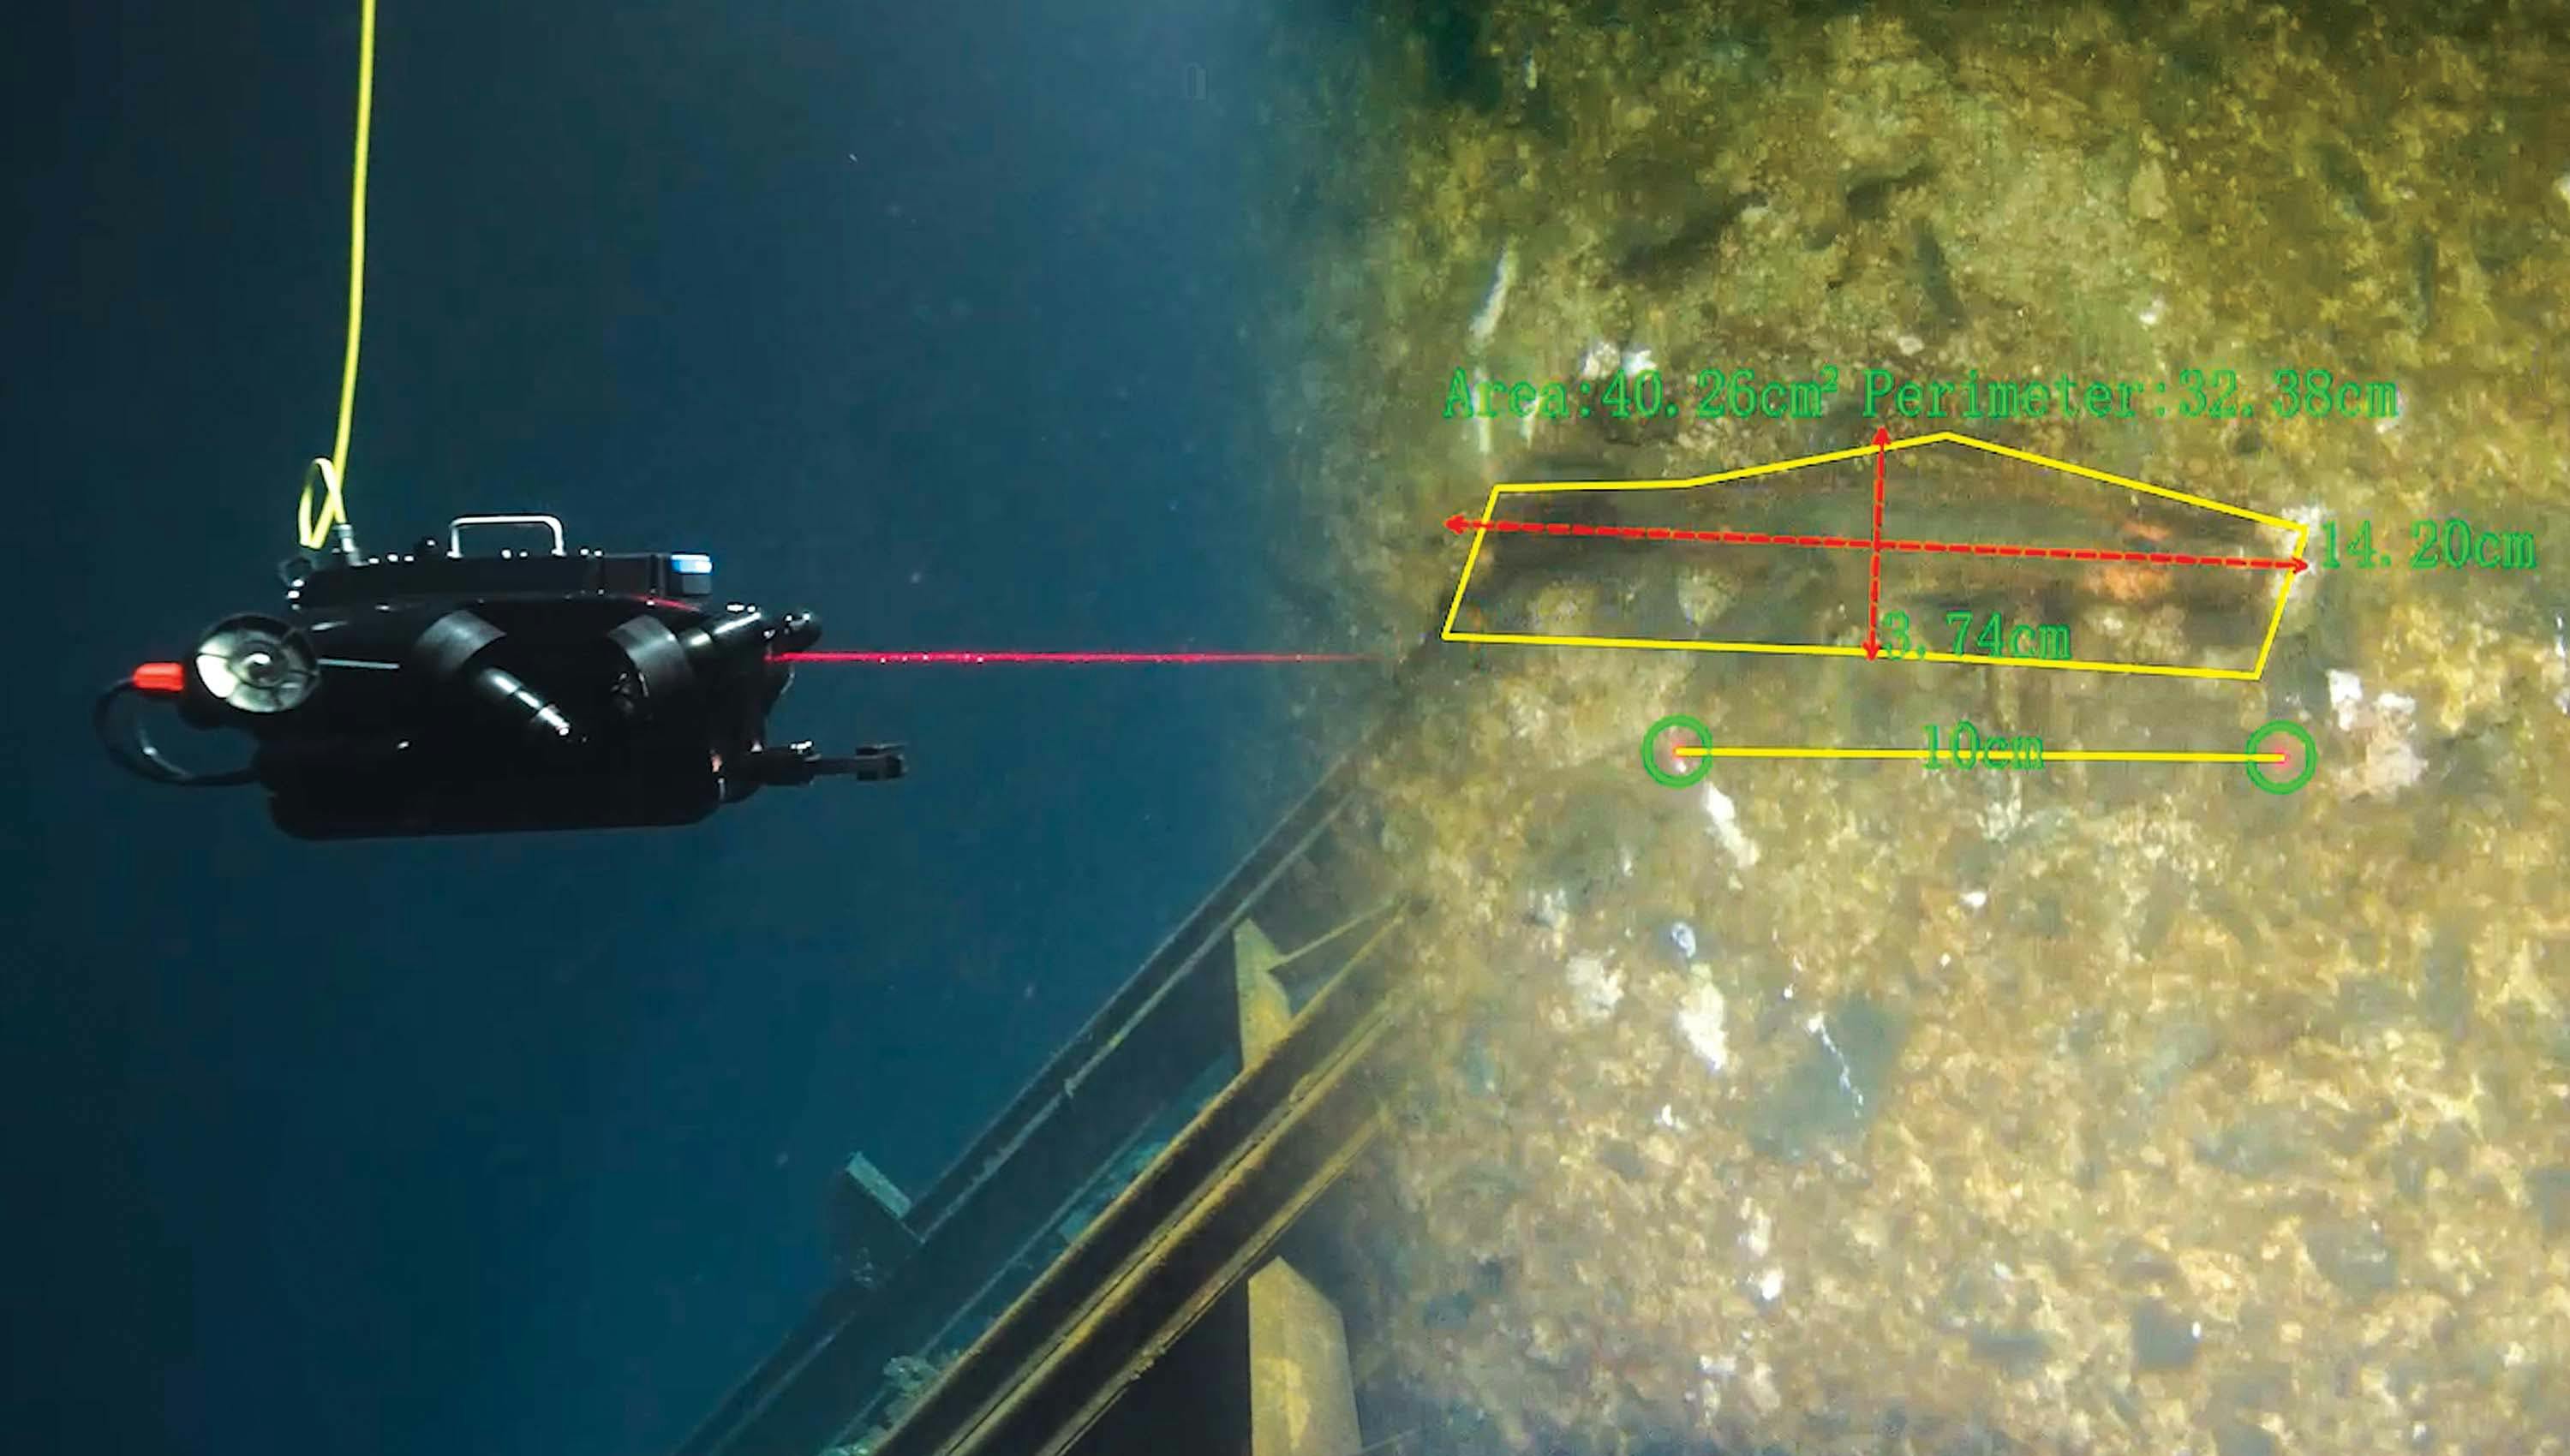 With the QYSEA measurement tool, FIFISH enables precise underwater measurements with augmented reality.